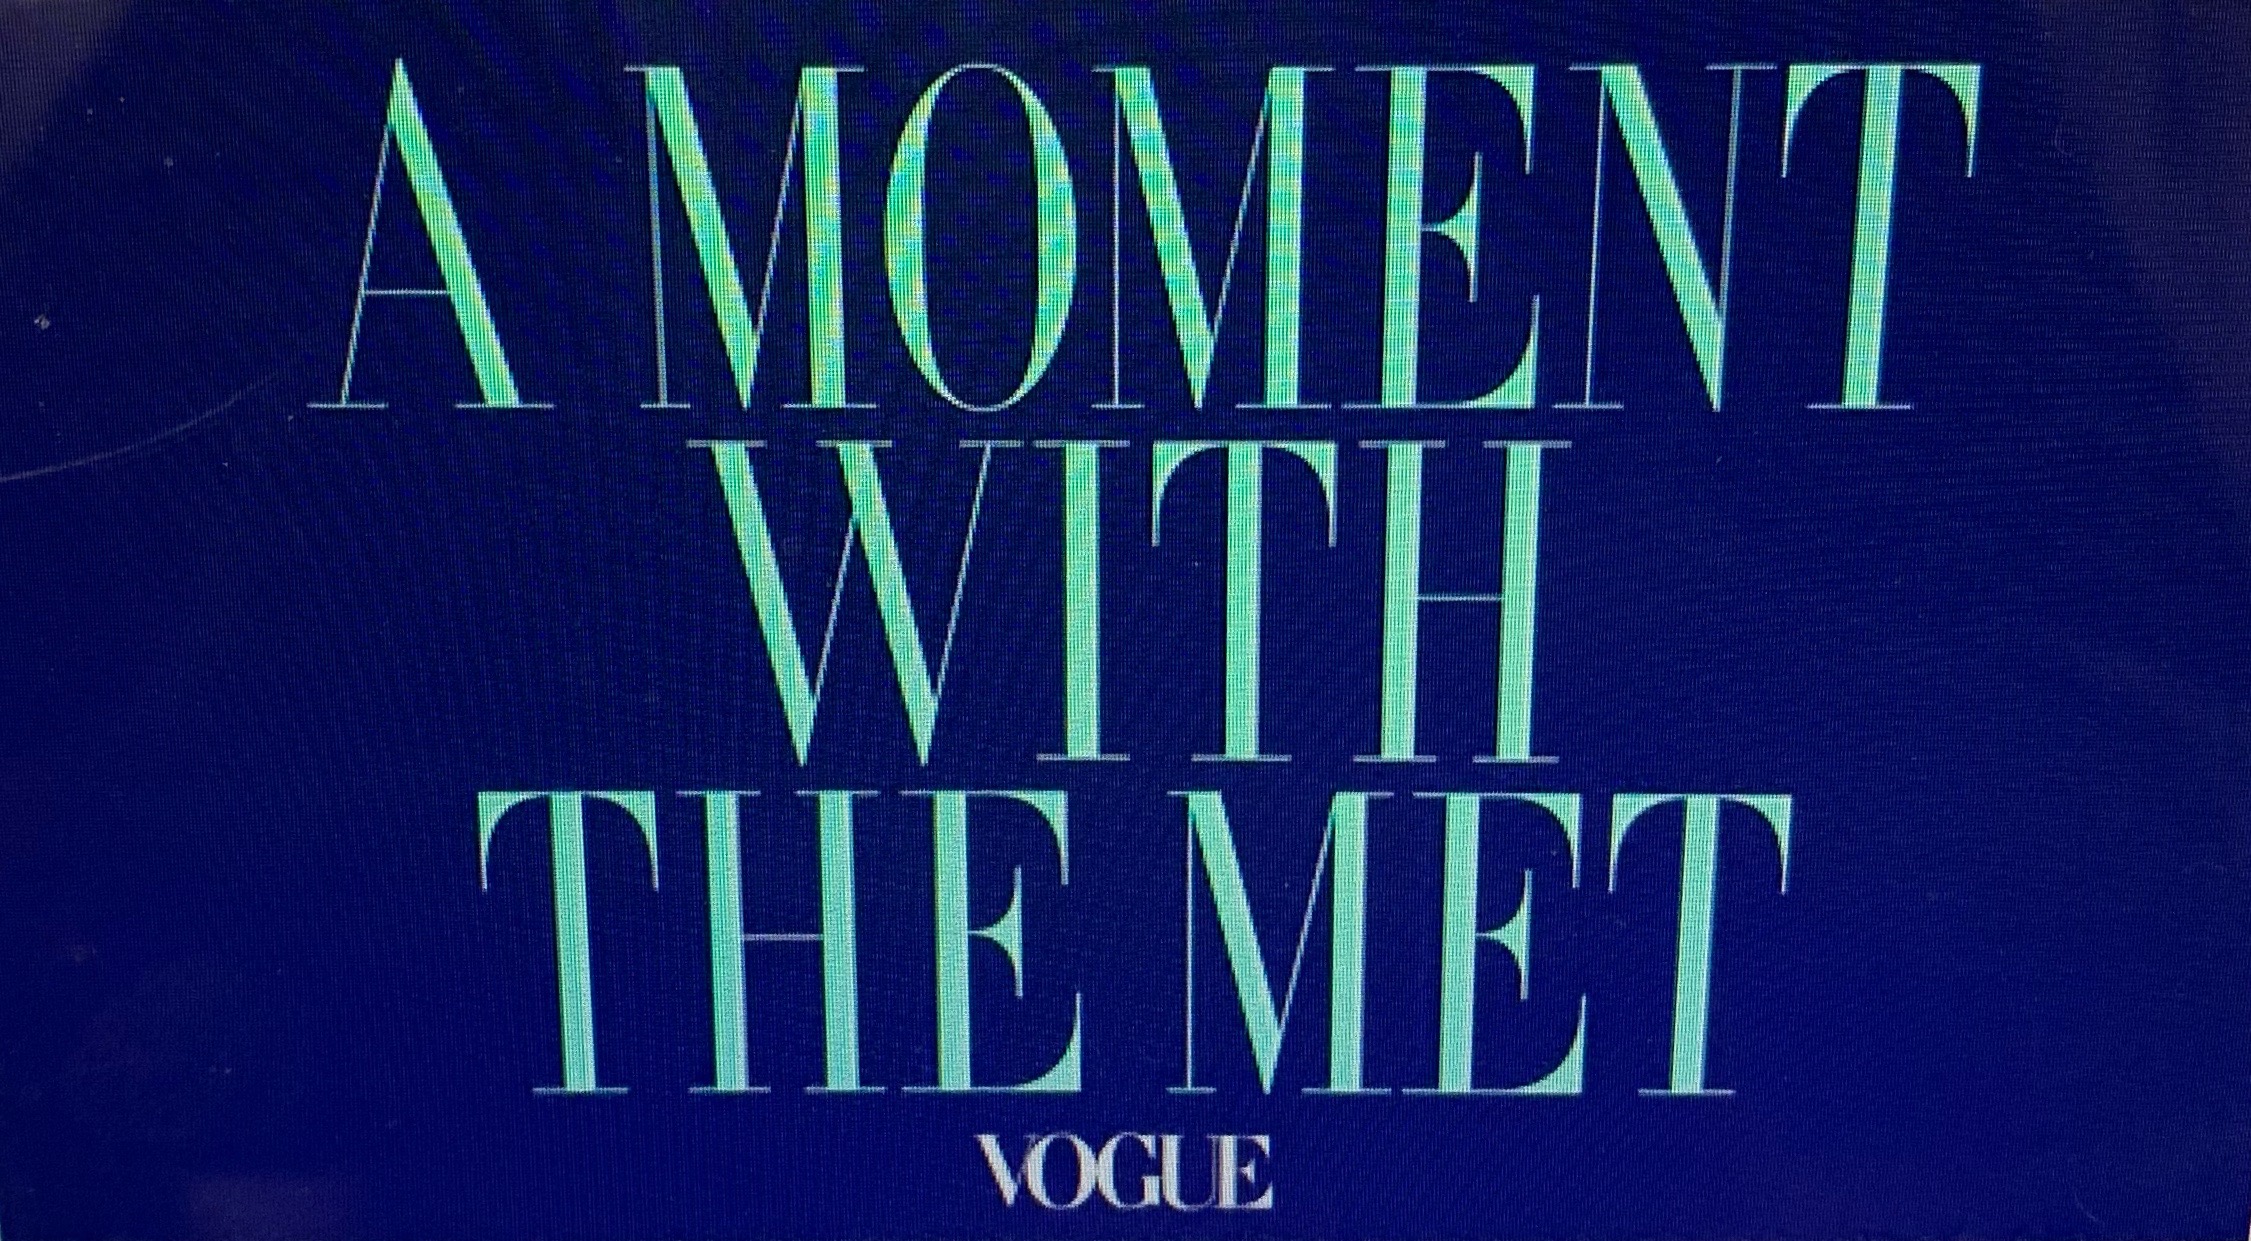 "A Moment with the Met" exclusive Vogue YouTube Celebration of the Met Gala